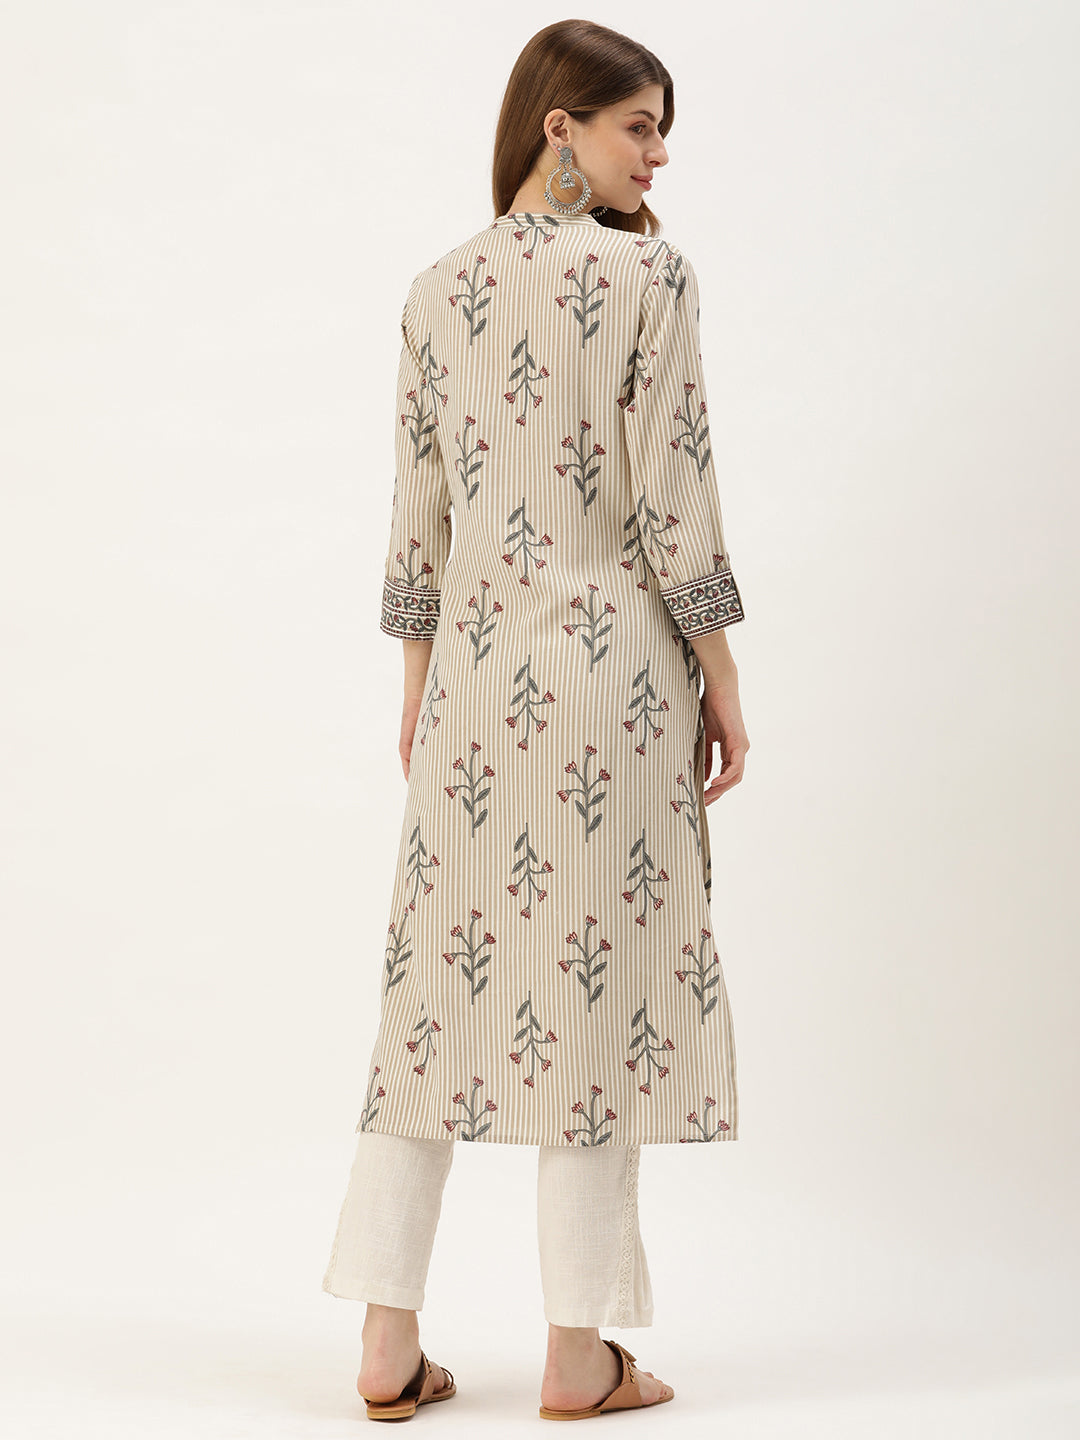 Beige Floral Printed Kurta with a pocket